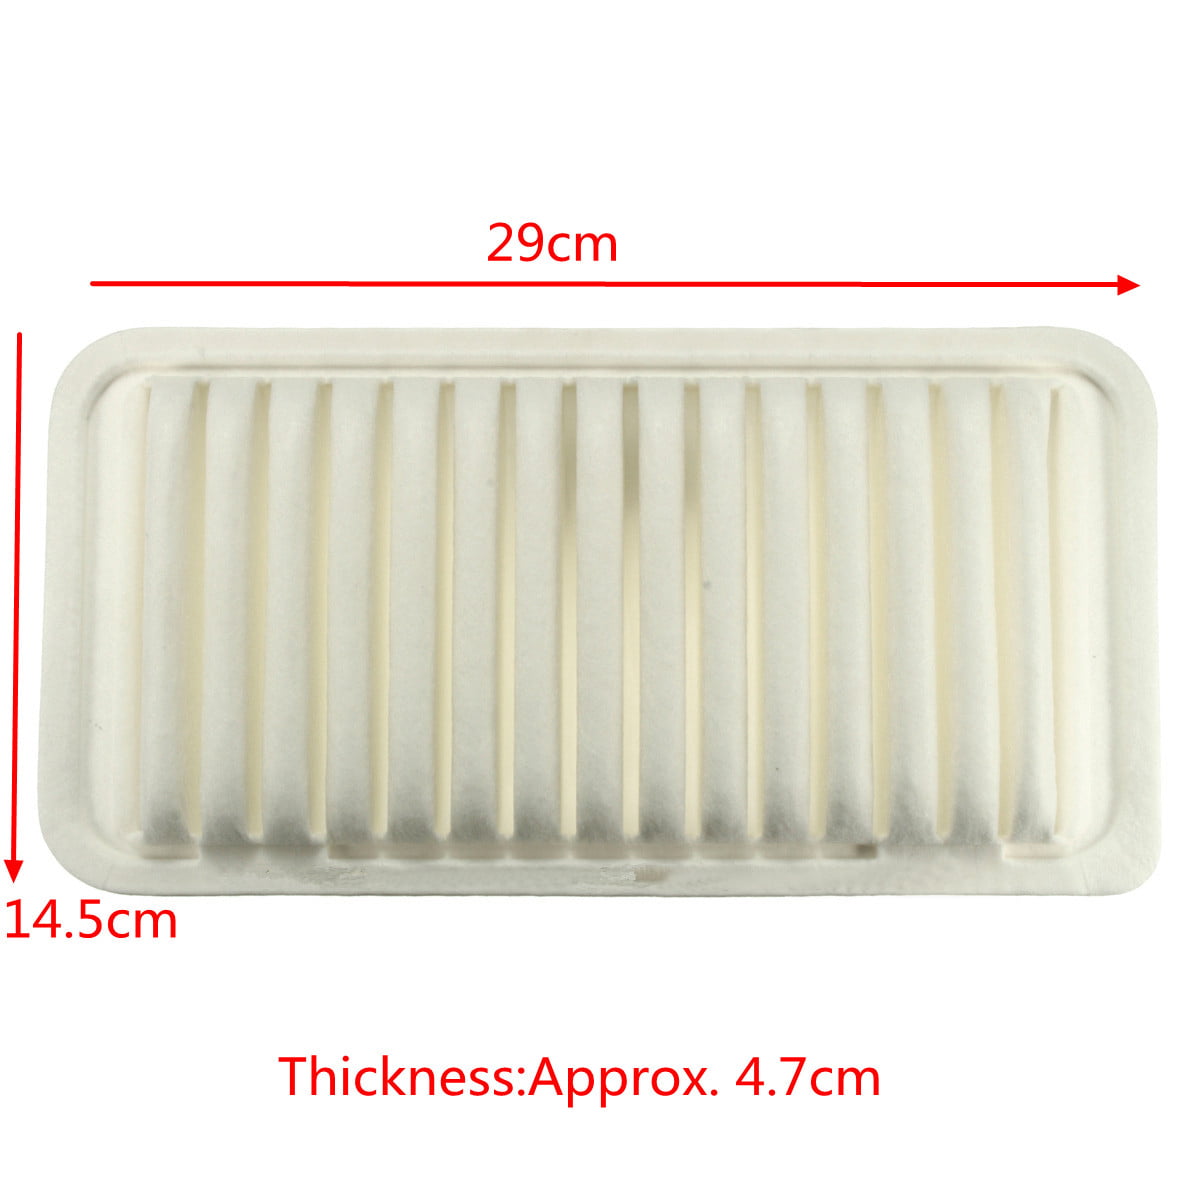 4x Engine Air Filter for 2003-2008 Toyota Corolla Toyota 17801 22020 